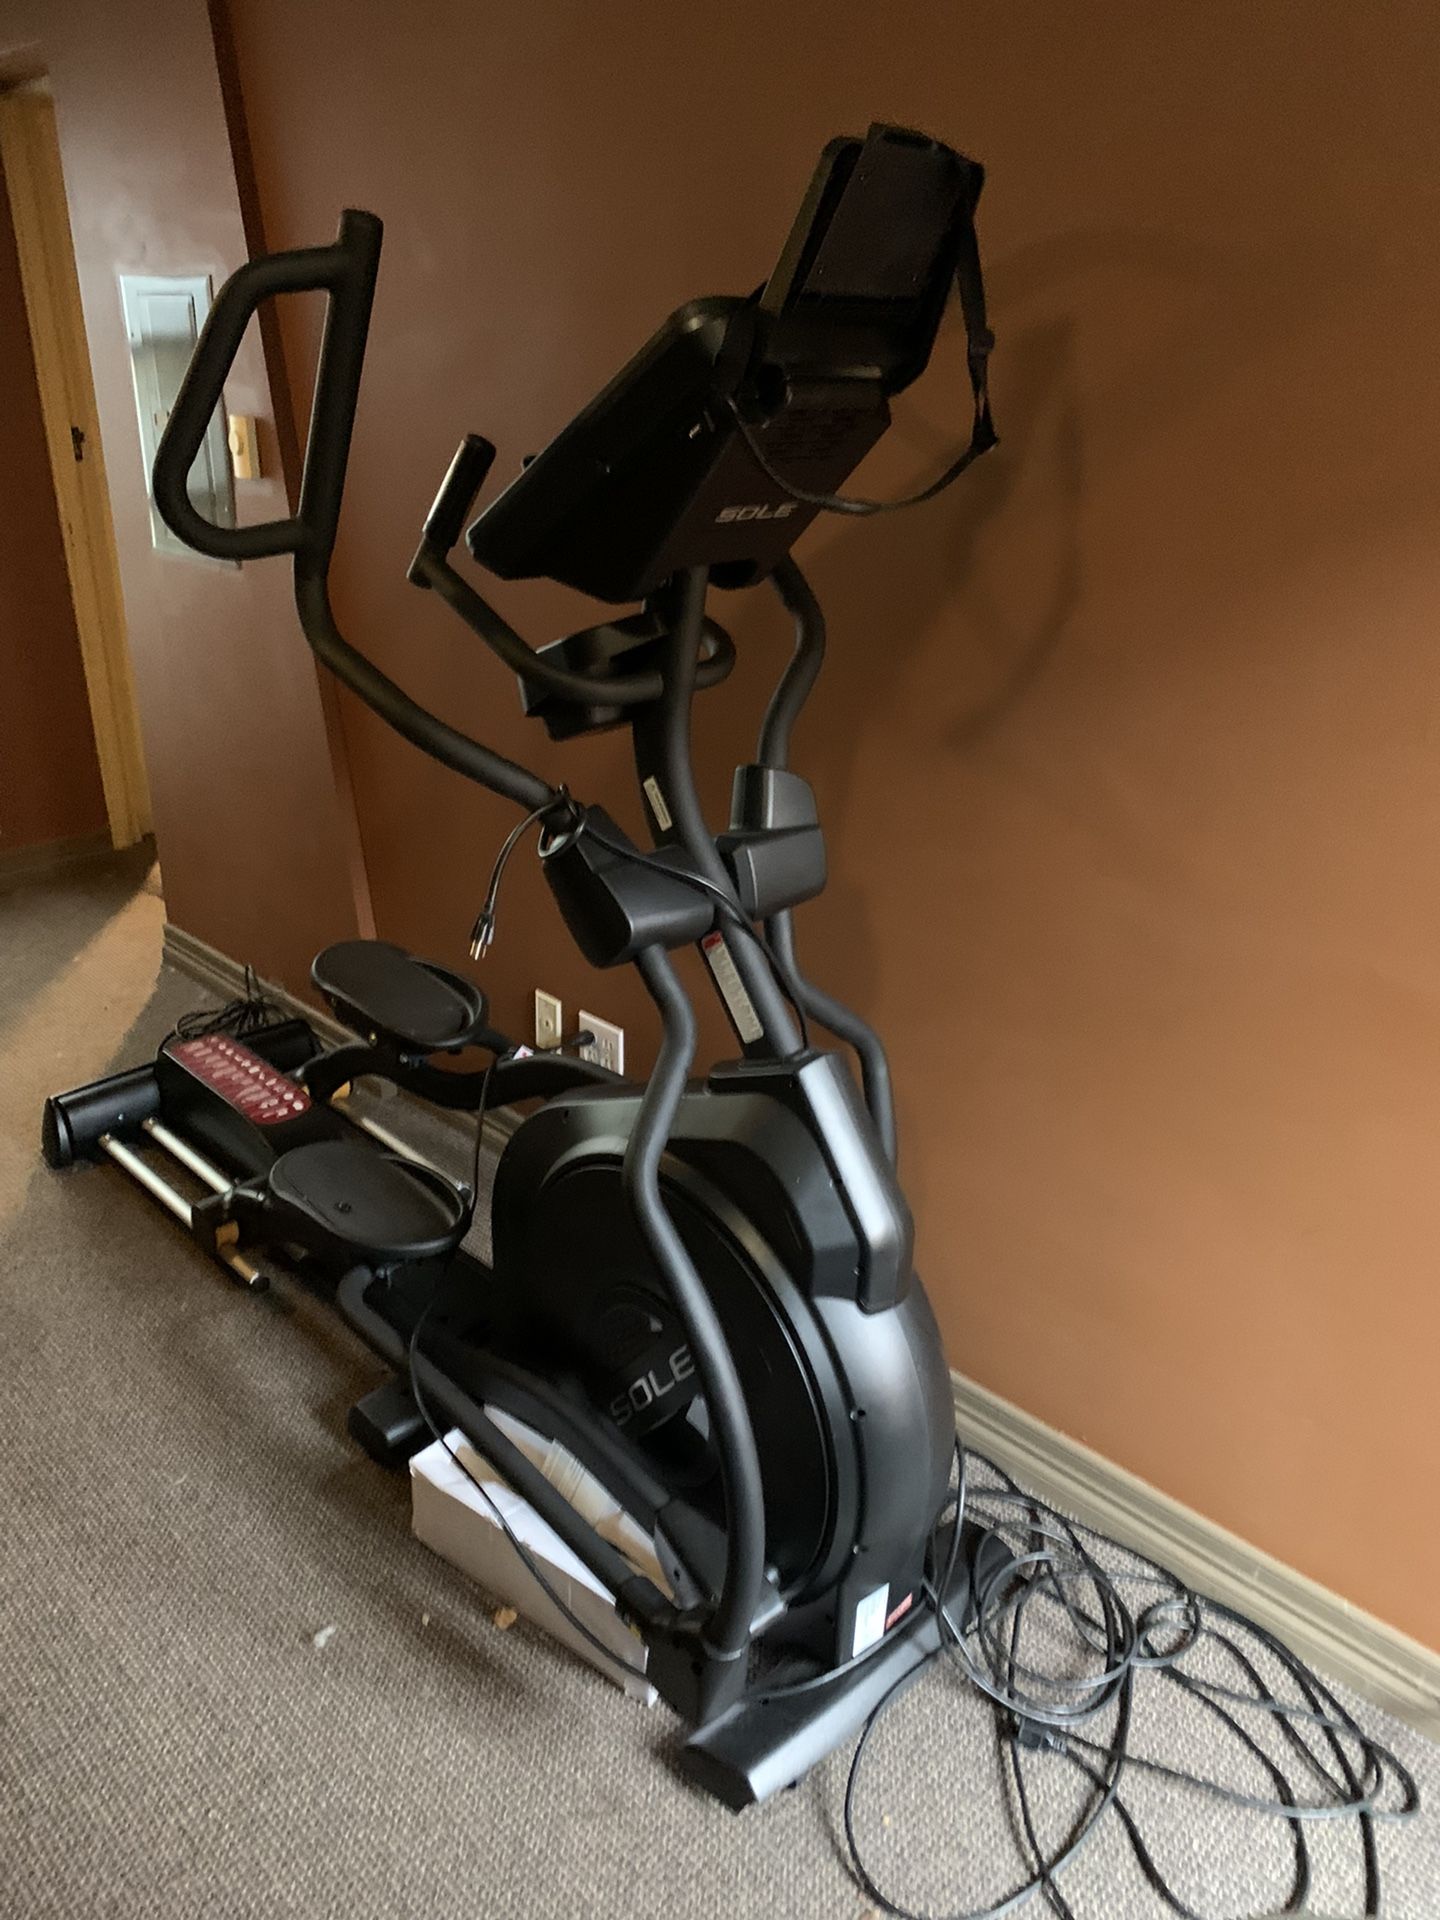 Sole E35 Elliptical From Dick’s Sporting Goods - Like New 